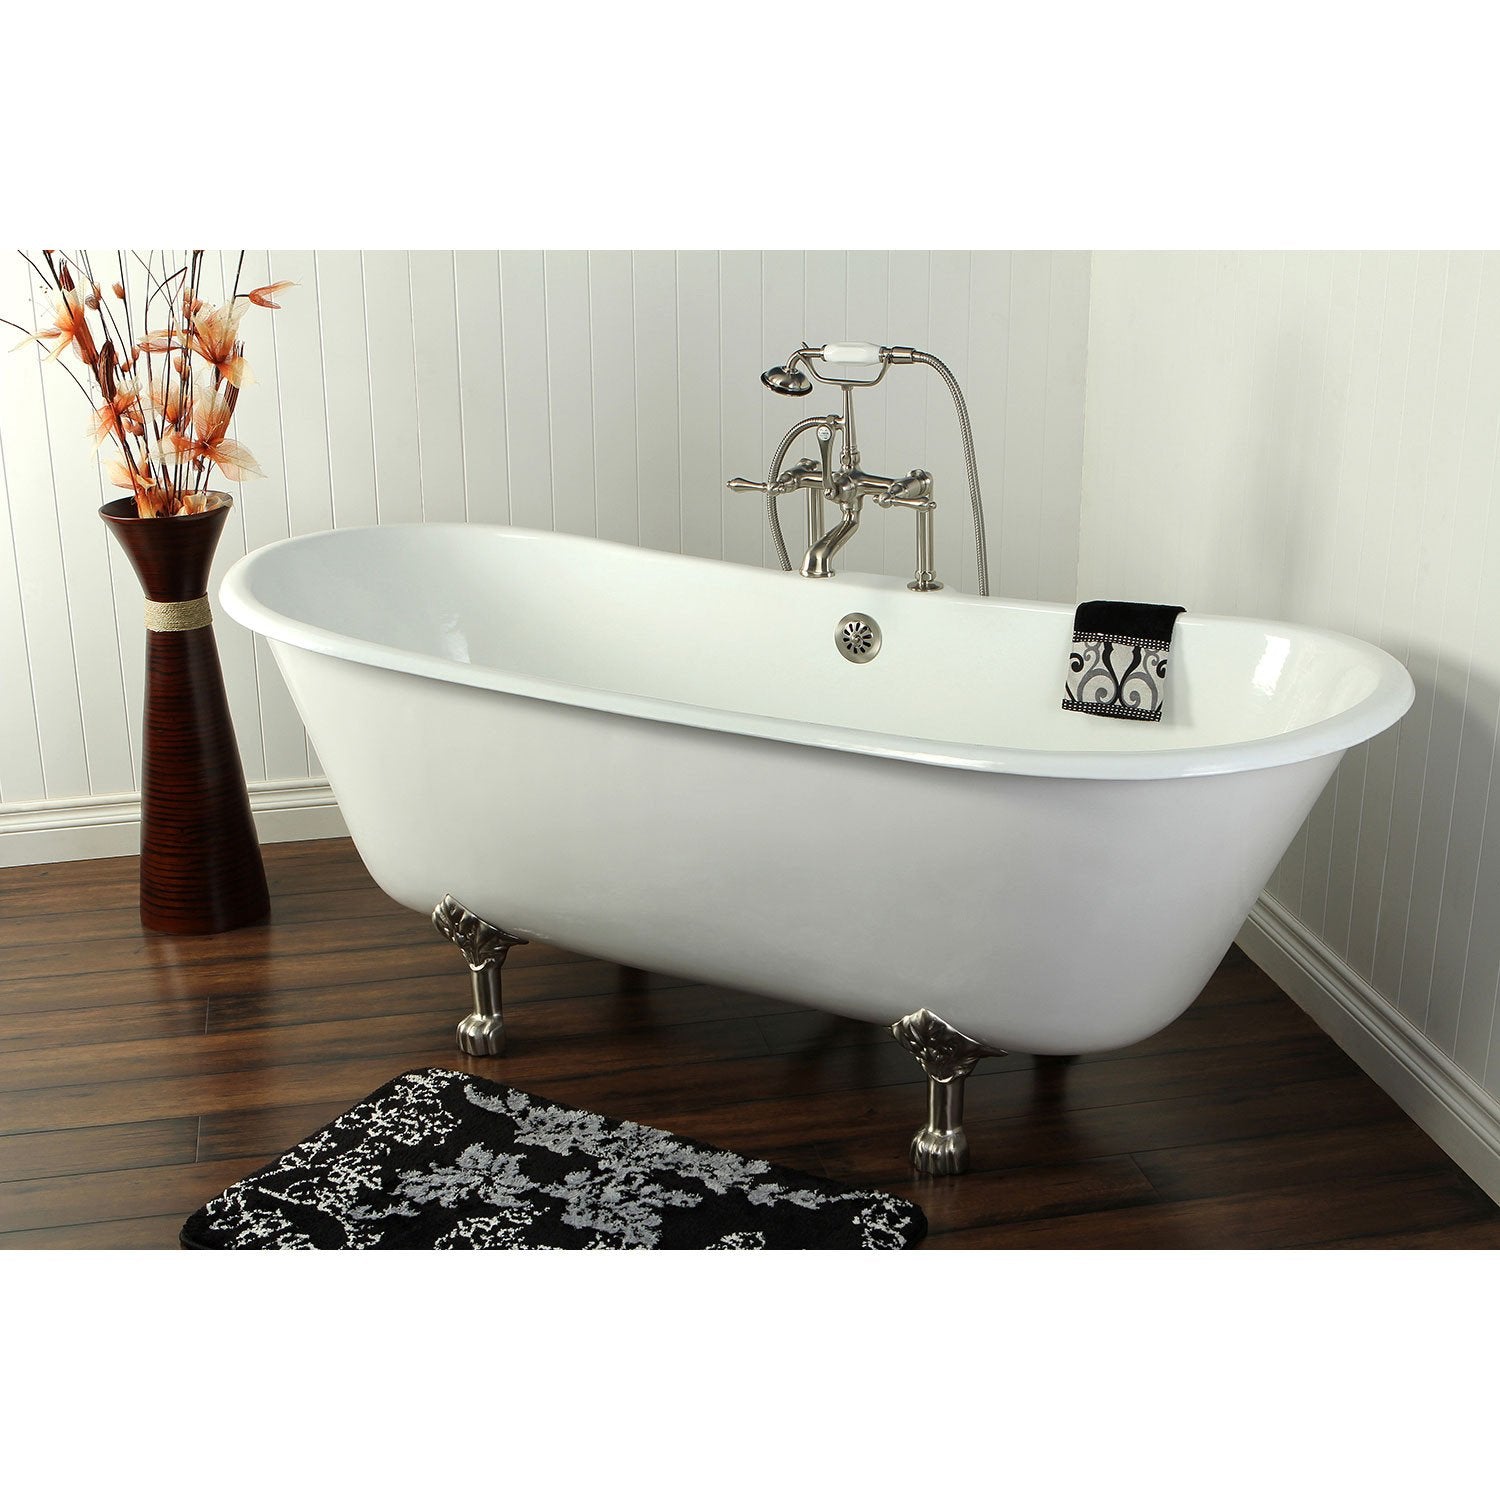 67" Cast Iron Slipper Clawfoot Tub and Satin Nickel Tub Hardware Package CTP04